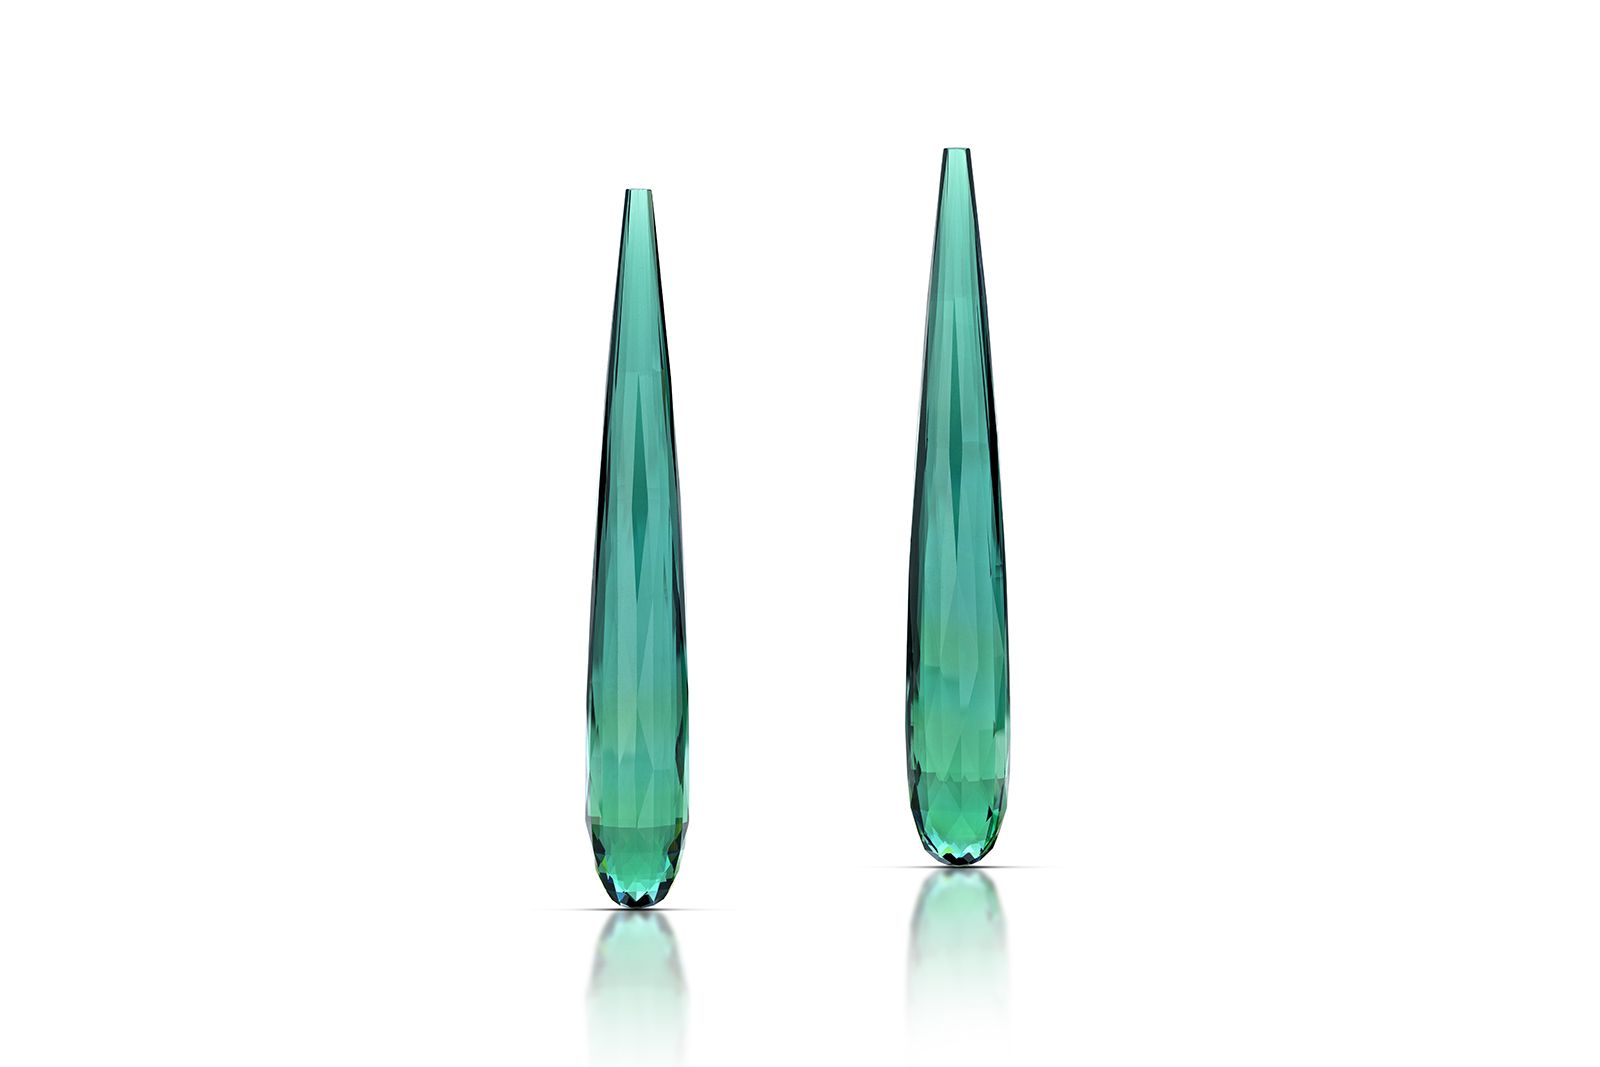 AGTA Cutting Edge Awards™ 2022 Pairs & Suites - 1st Place and Best of Single Entries Cutting Edge - Robert Knupfer of Knupfer International Gems, Inc. with a pair of blue/green briolette drop tourmalines totalling 75.57 carats 